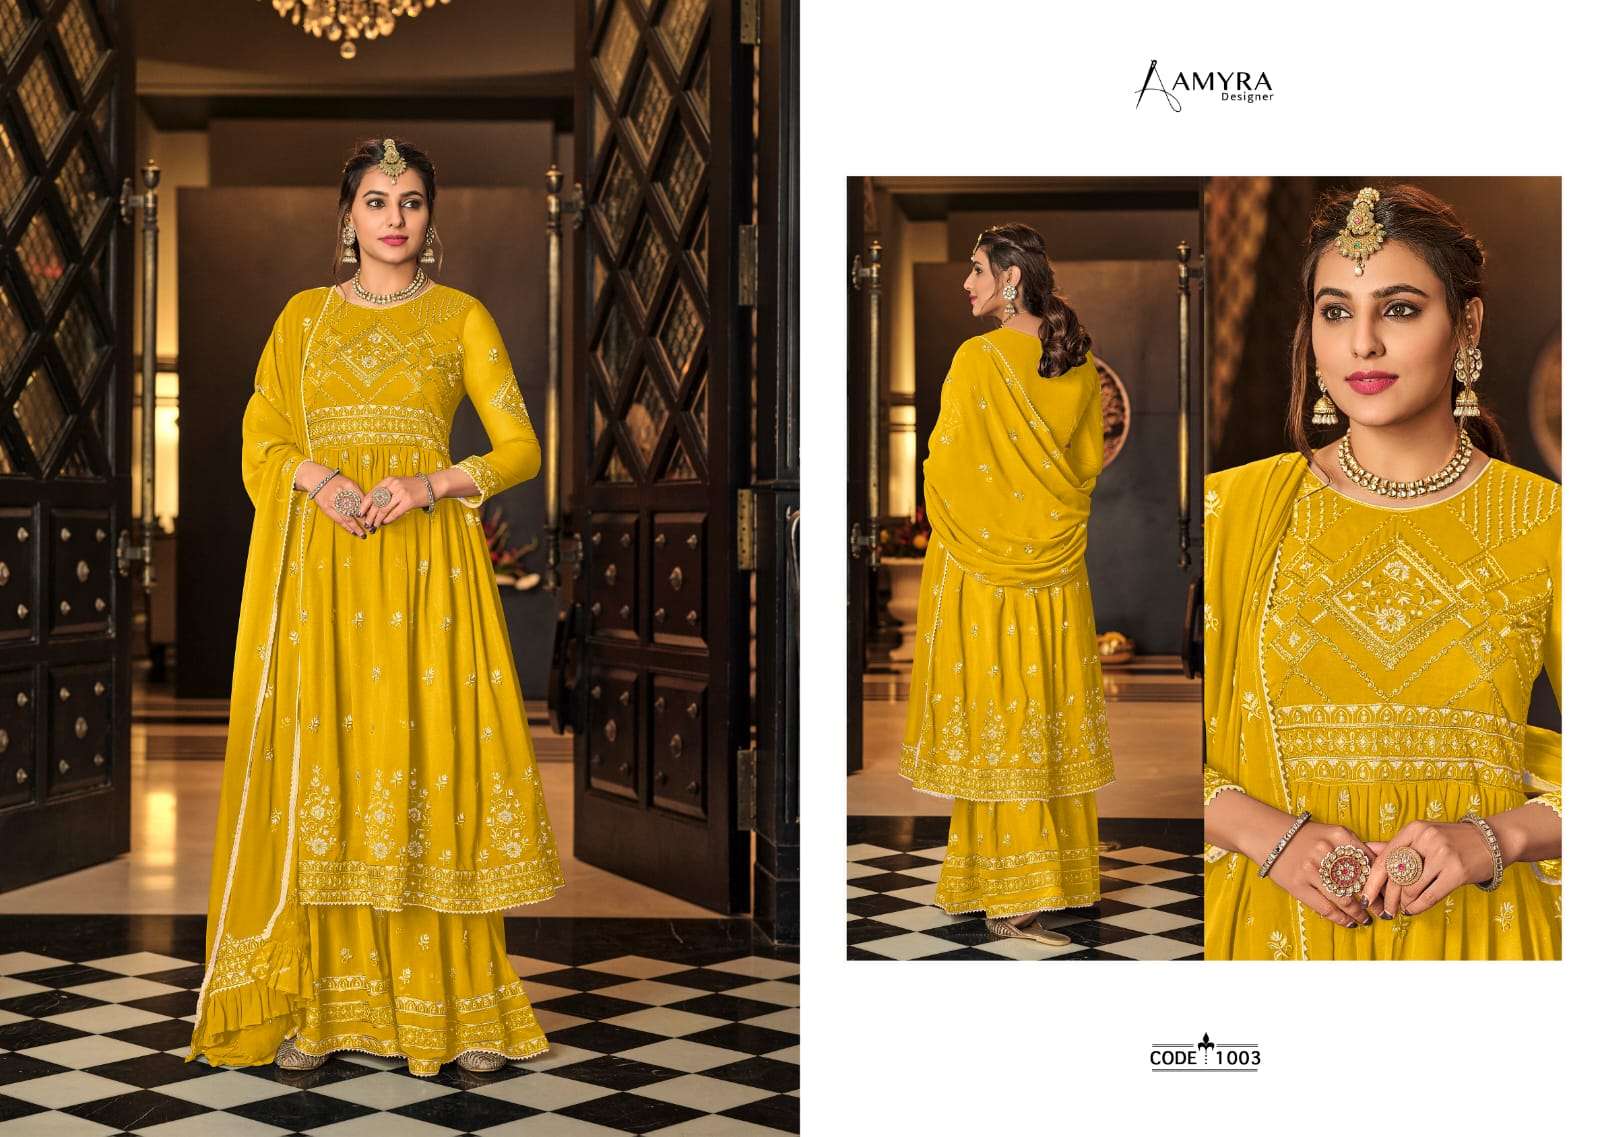 Vintage By Amyra Designer 1001 To 1004 Series Beautiful Stylish Sharara Suits Fancy Colorful Casual Wear & Ethnic Wear & Ready To Wear Heavy Georgette Embroidered Dresses At Wholesale Price